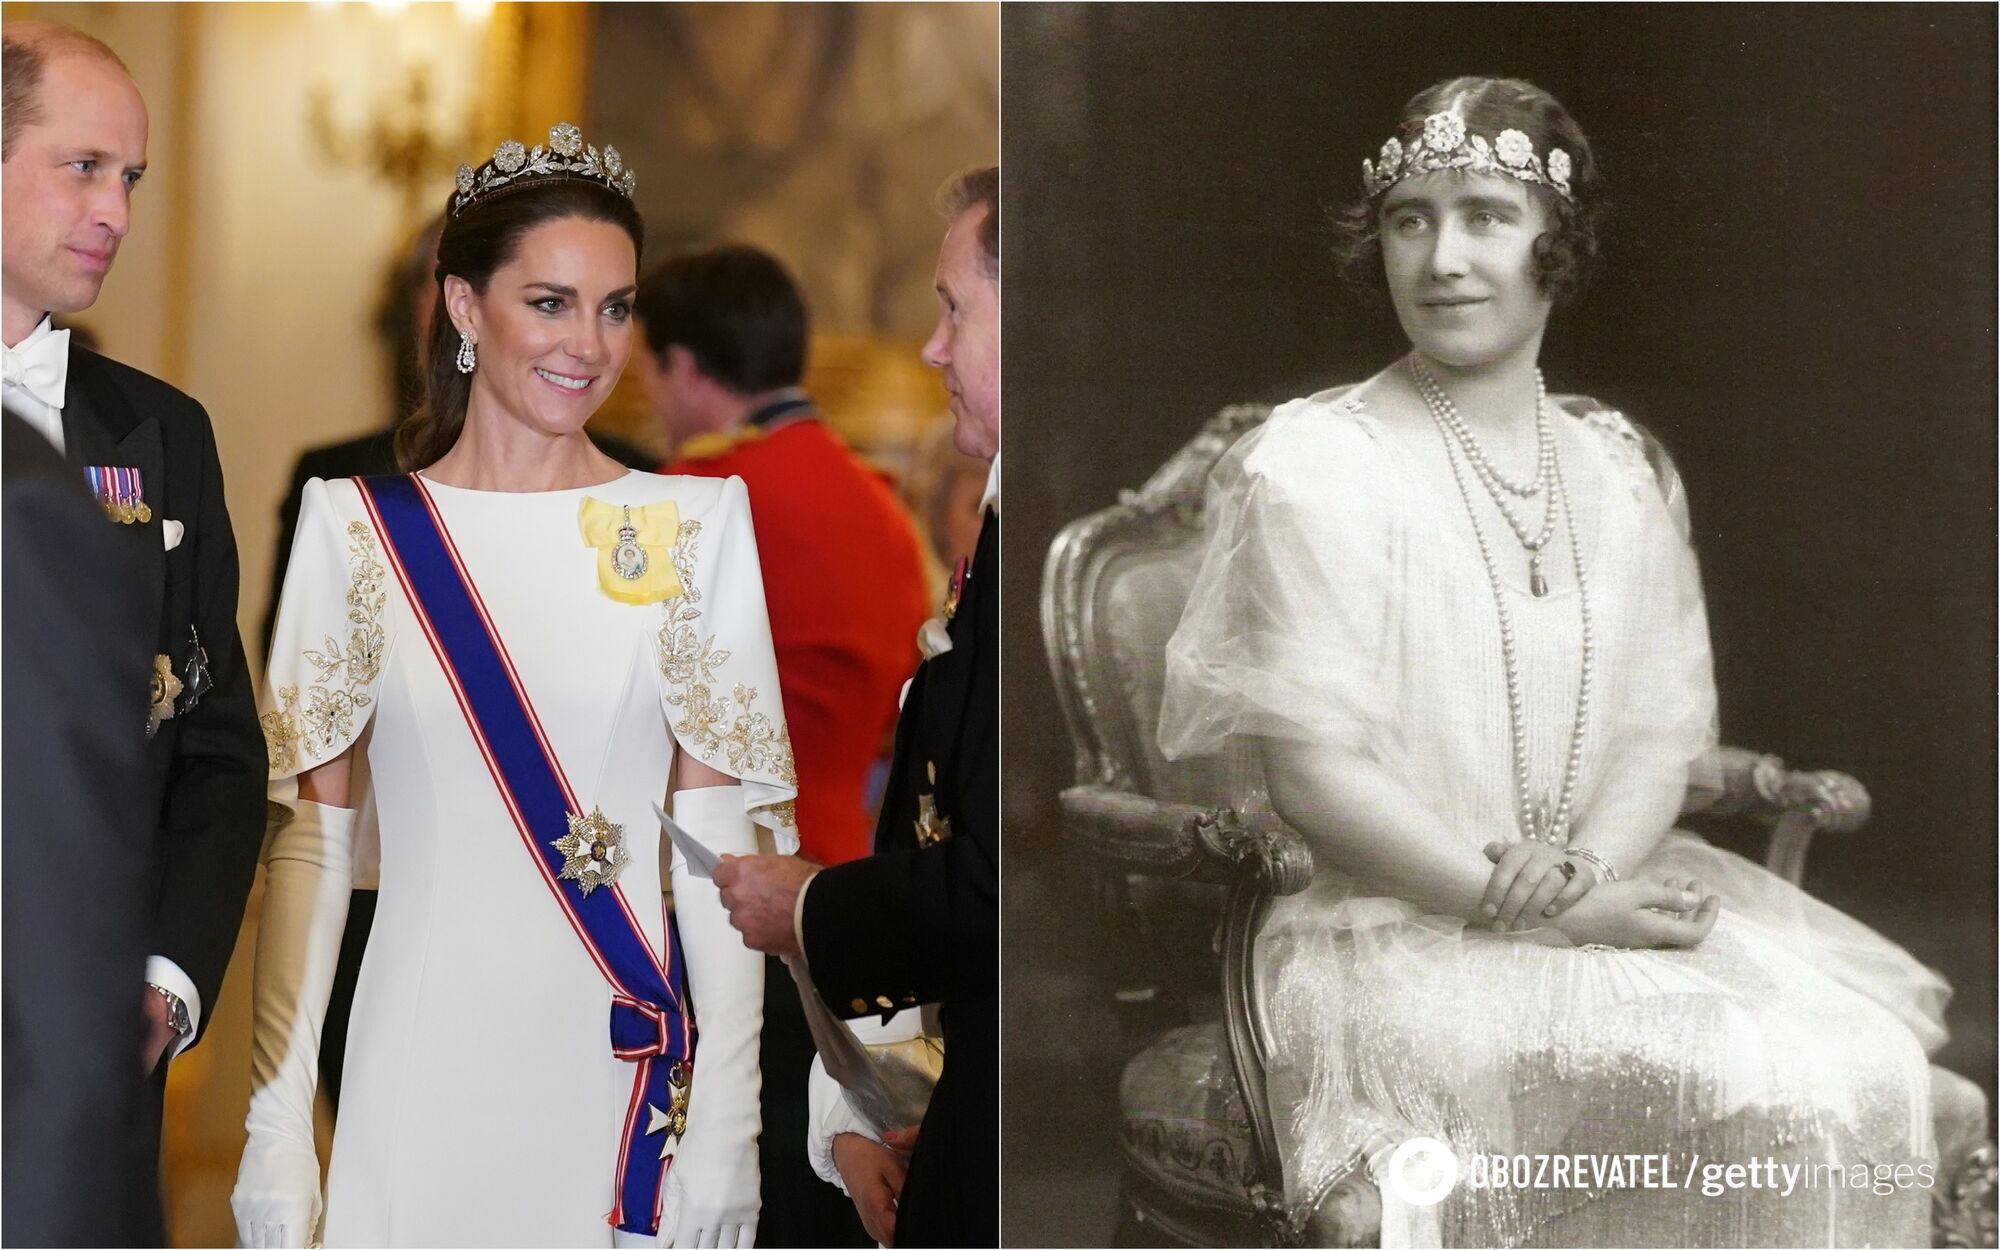 The king's favorite daughter-in-law: Kate Middleton wears a diamond tiara not seen in 100 years